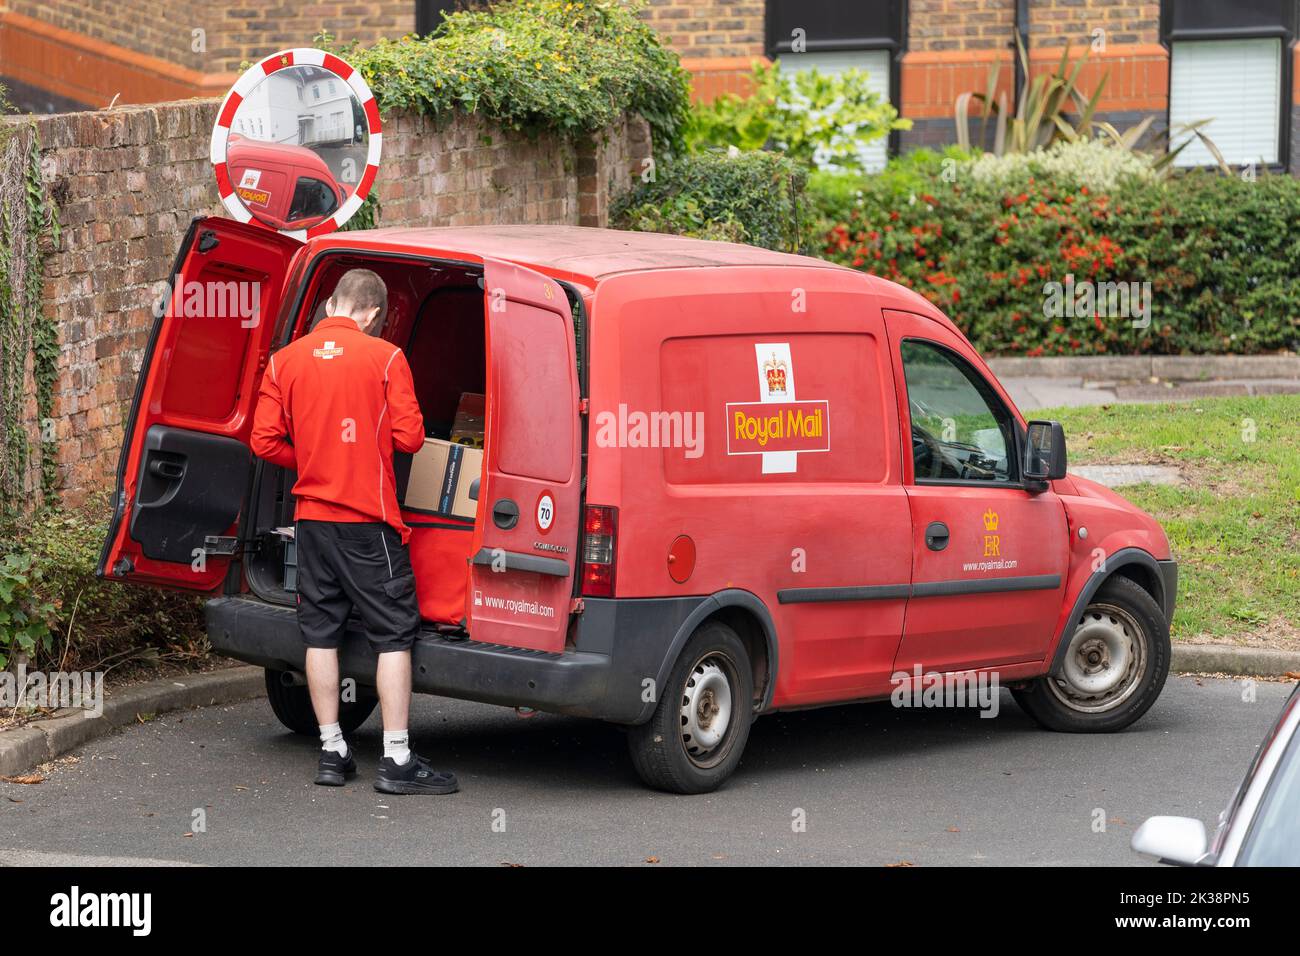 Royal Mail Group red delivery van and post man. England, UK. Concept - Royal Mail brand, postal service, mail collection, parcel delivery Stock Photo